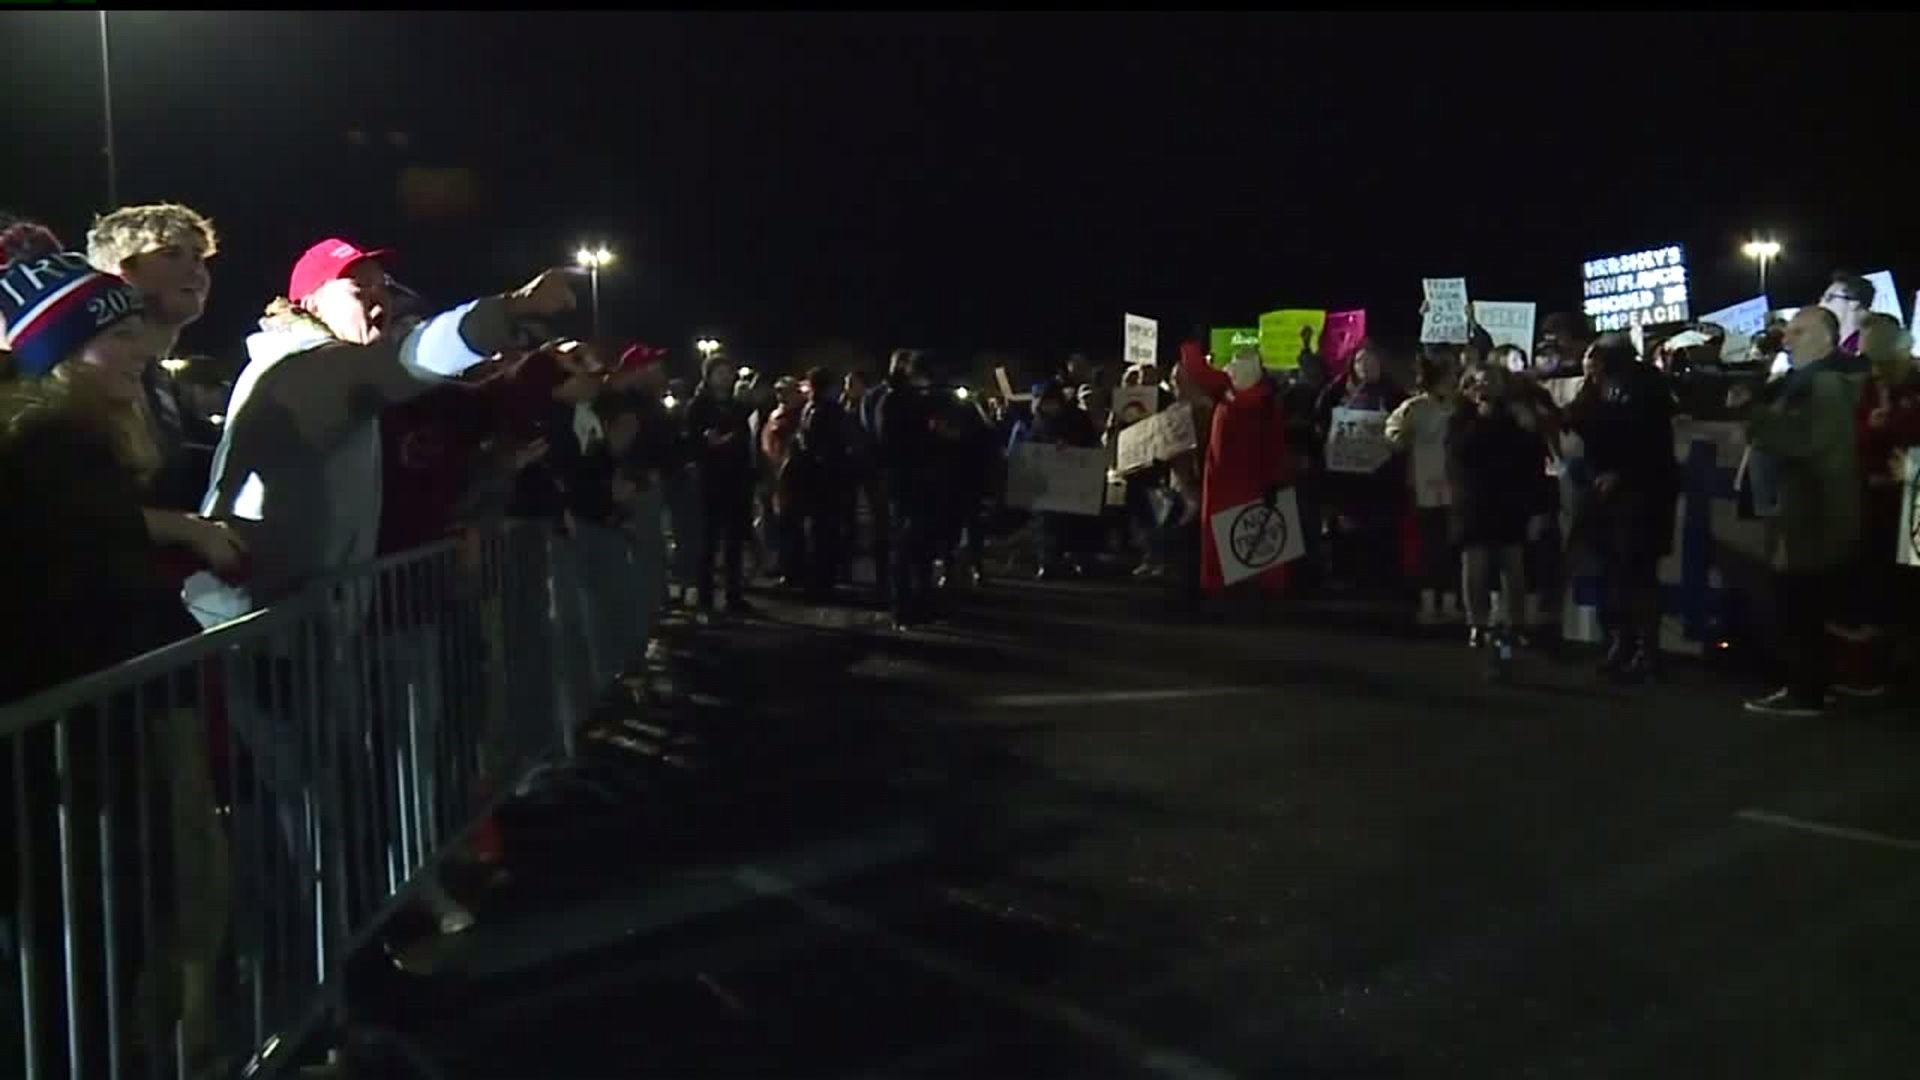 Tense moments at protest outside President Trump rally